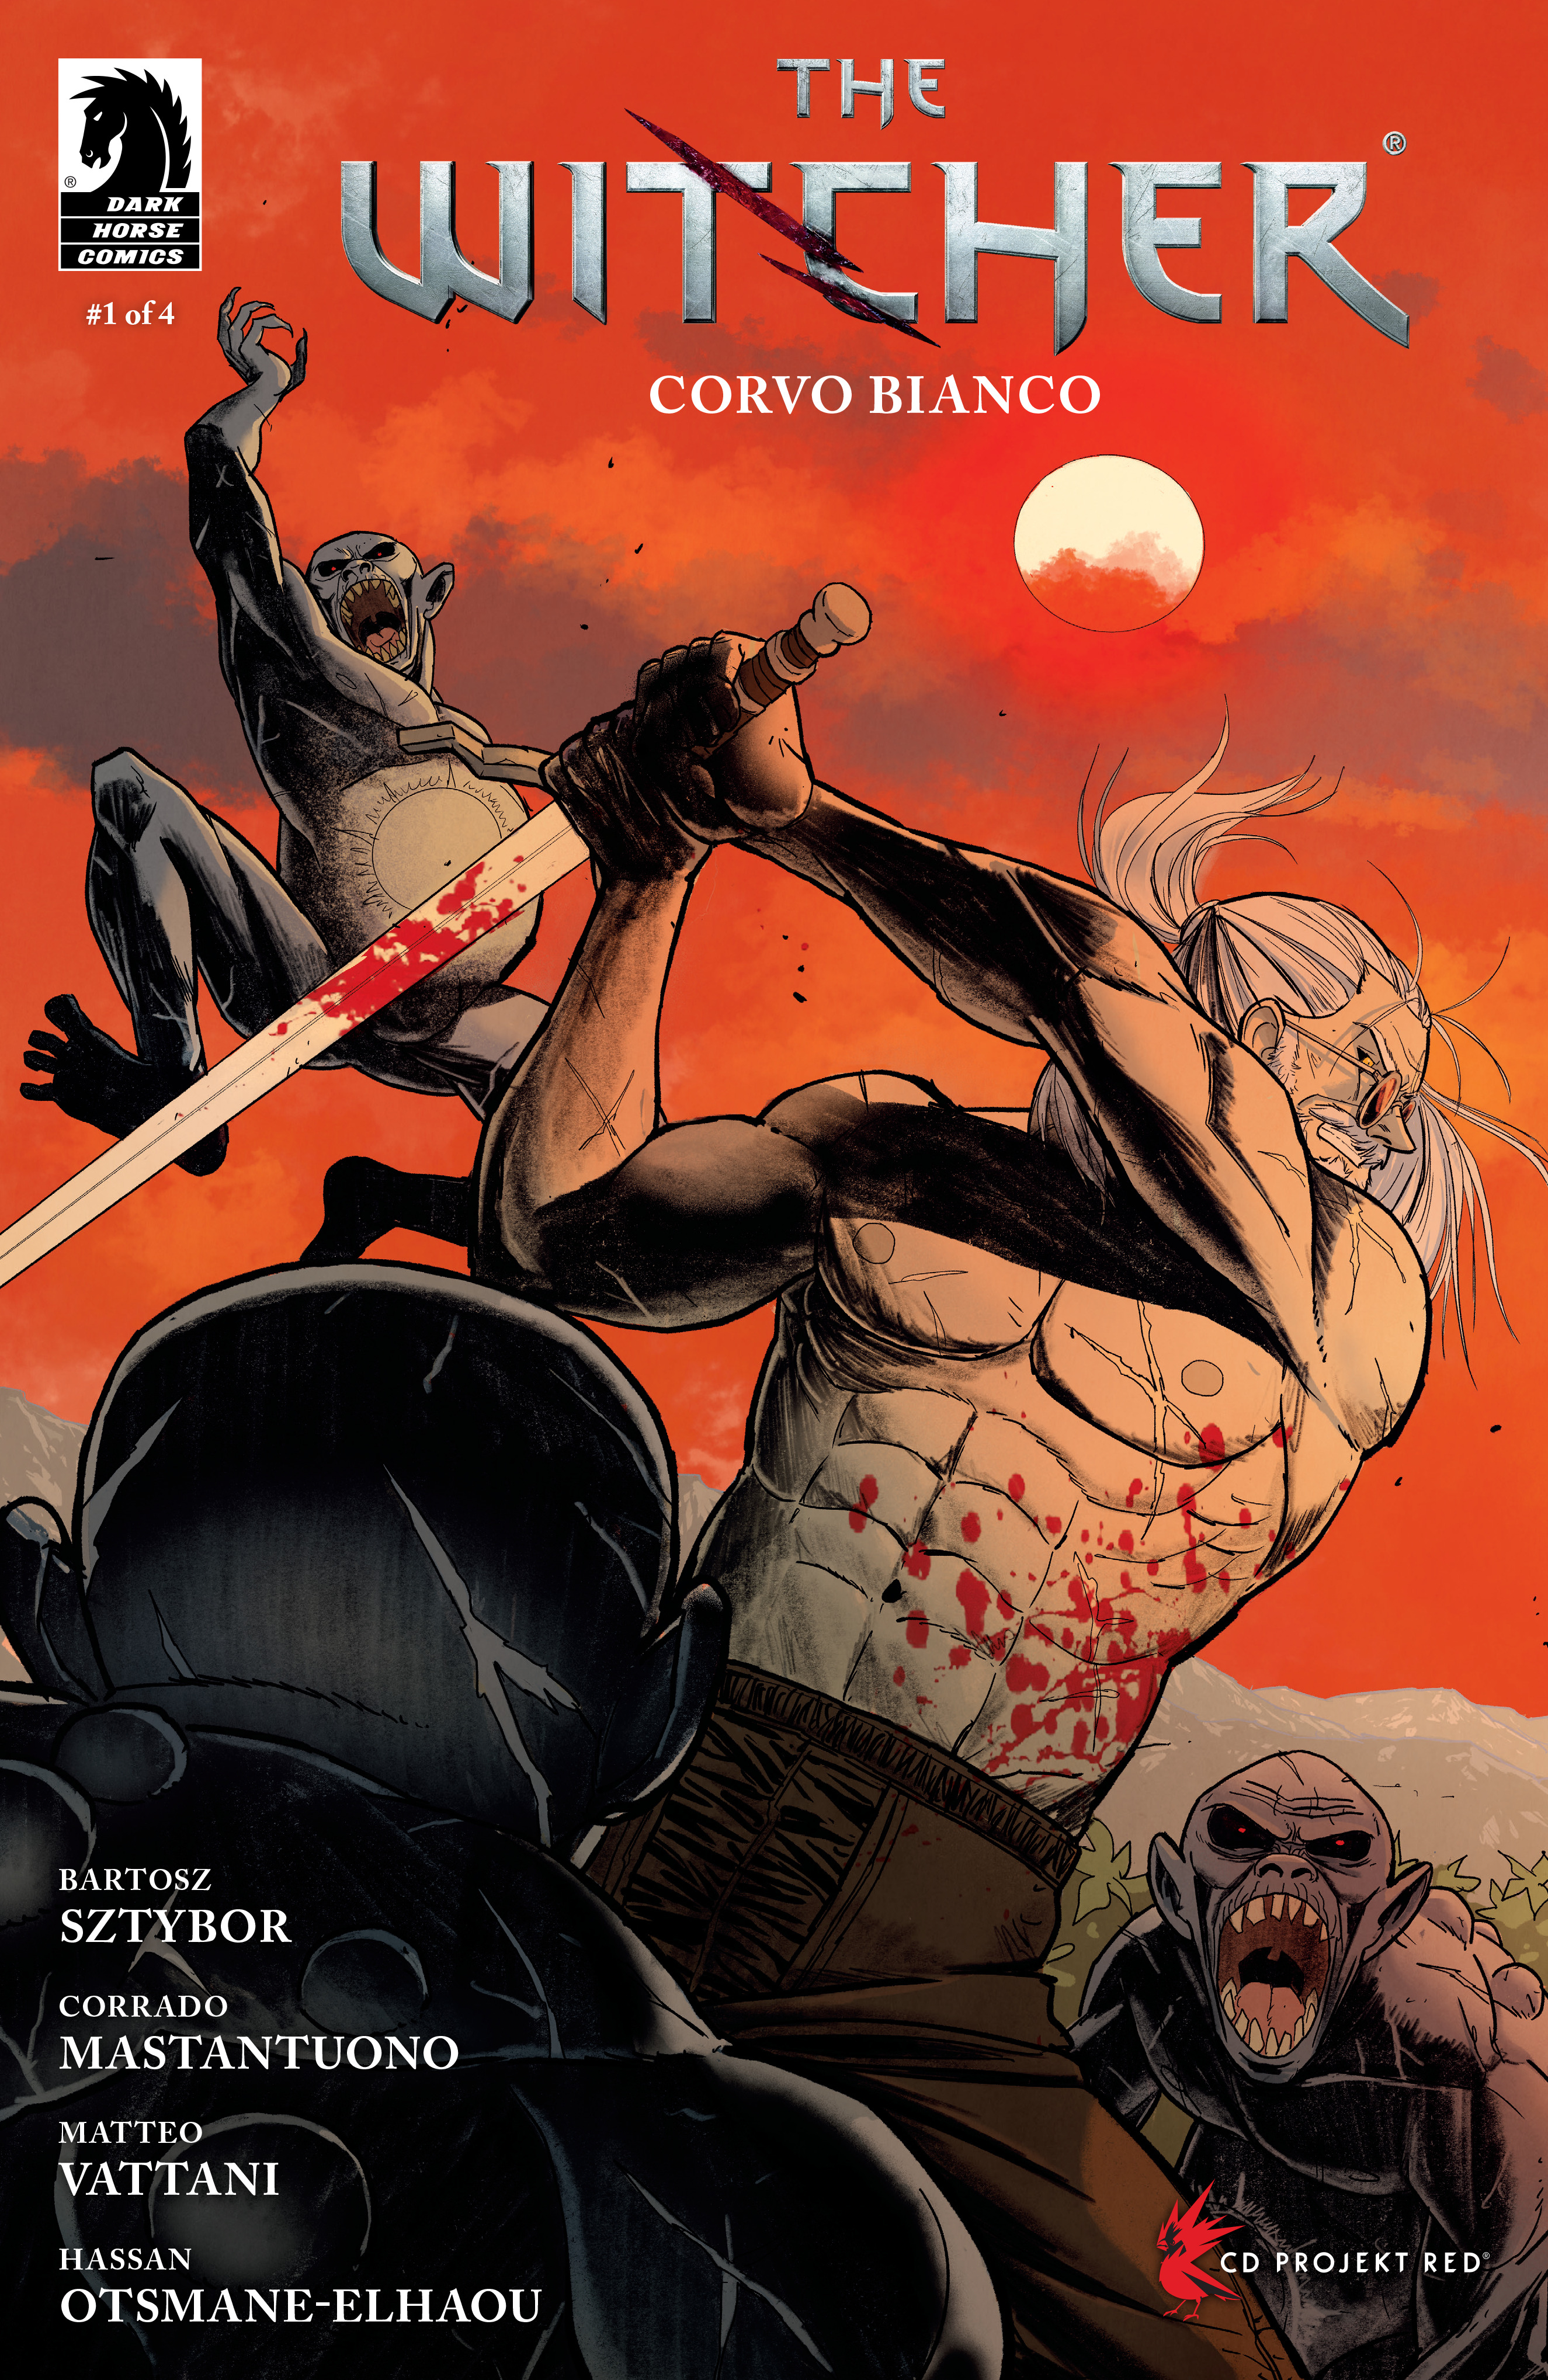 The Witcher: Corvo Bianco issue 1 cover art